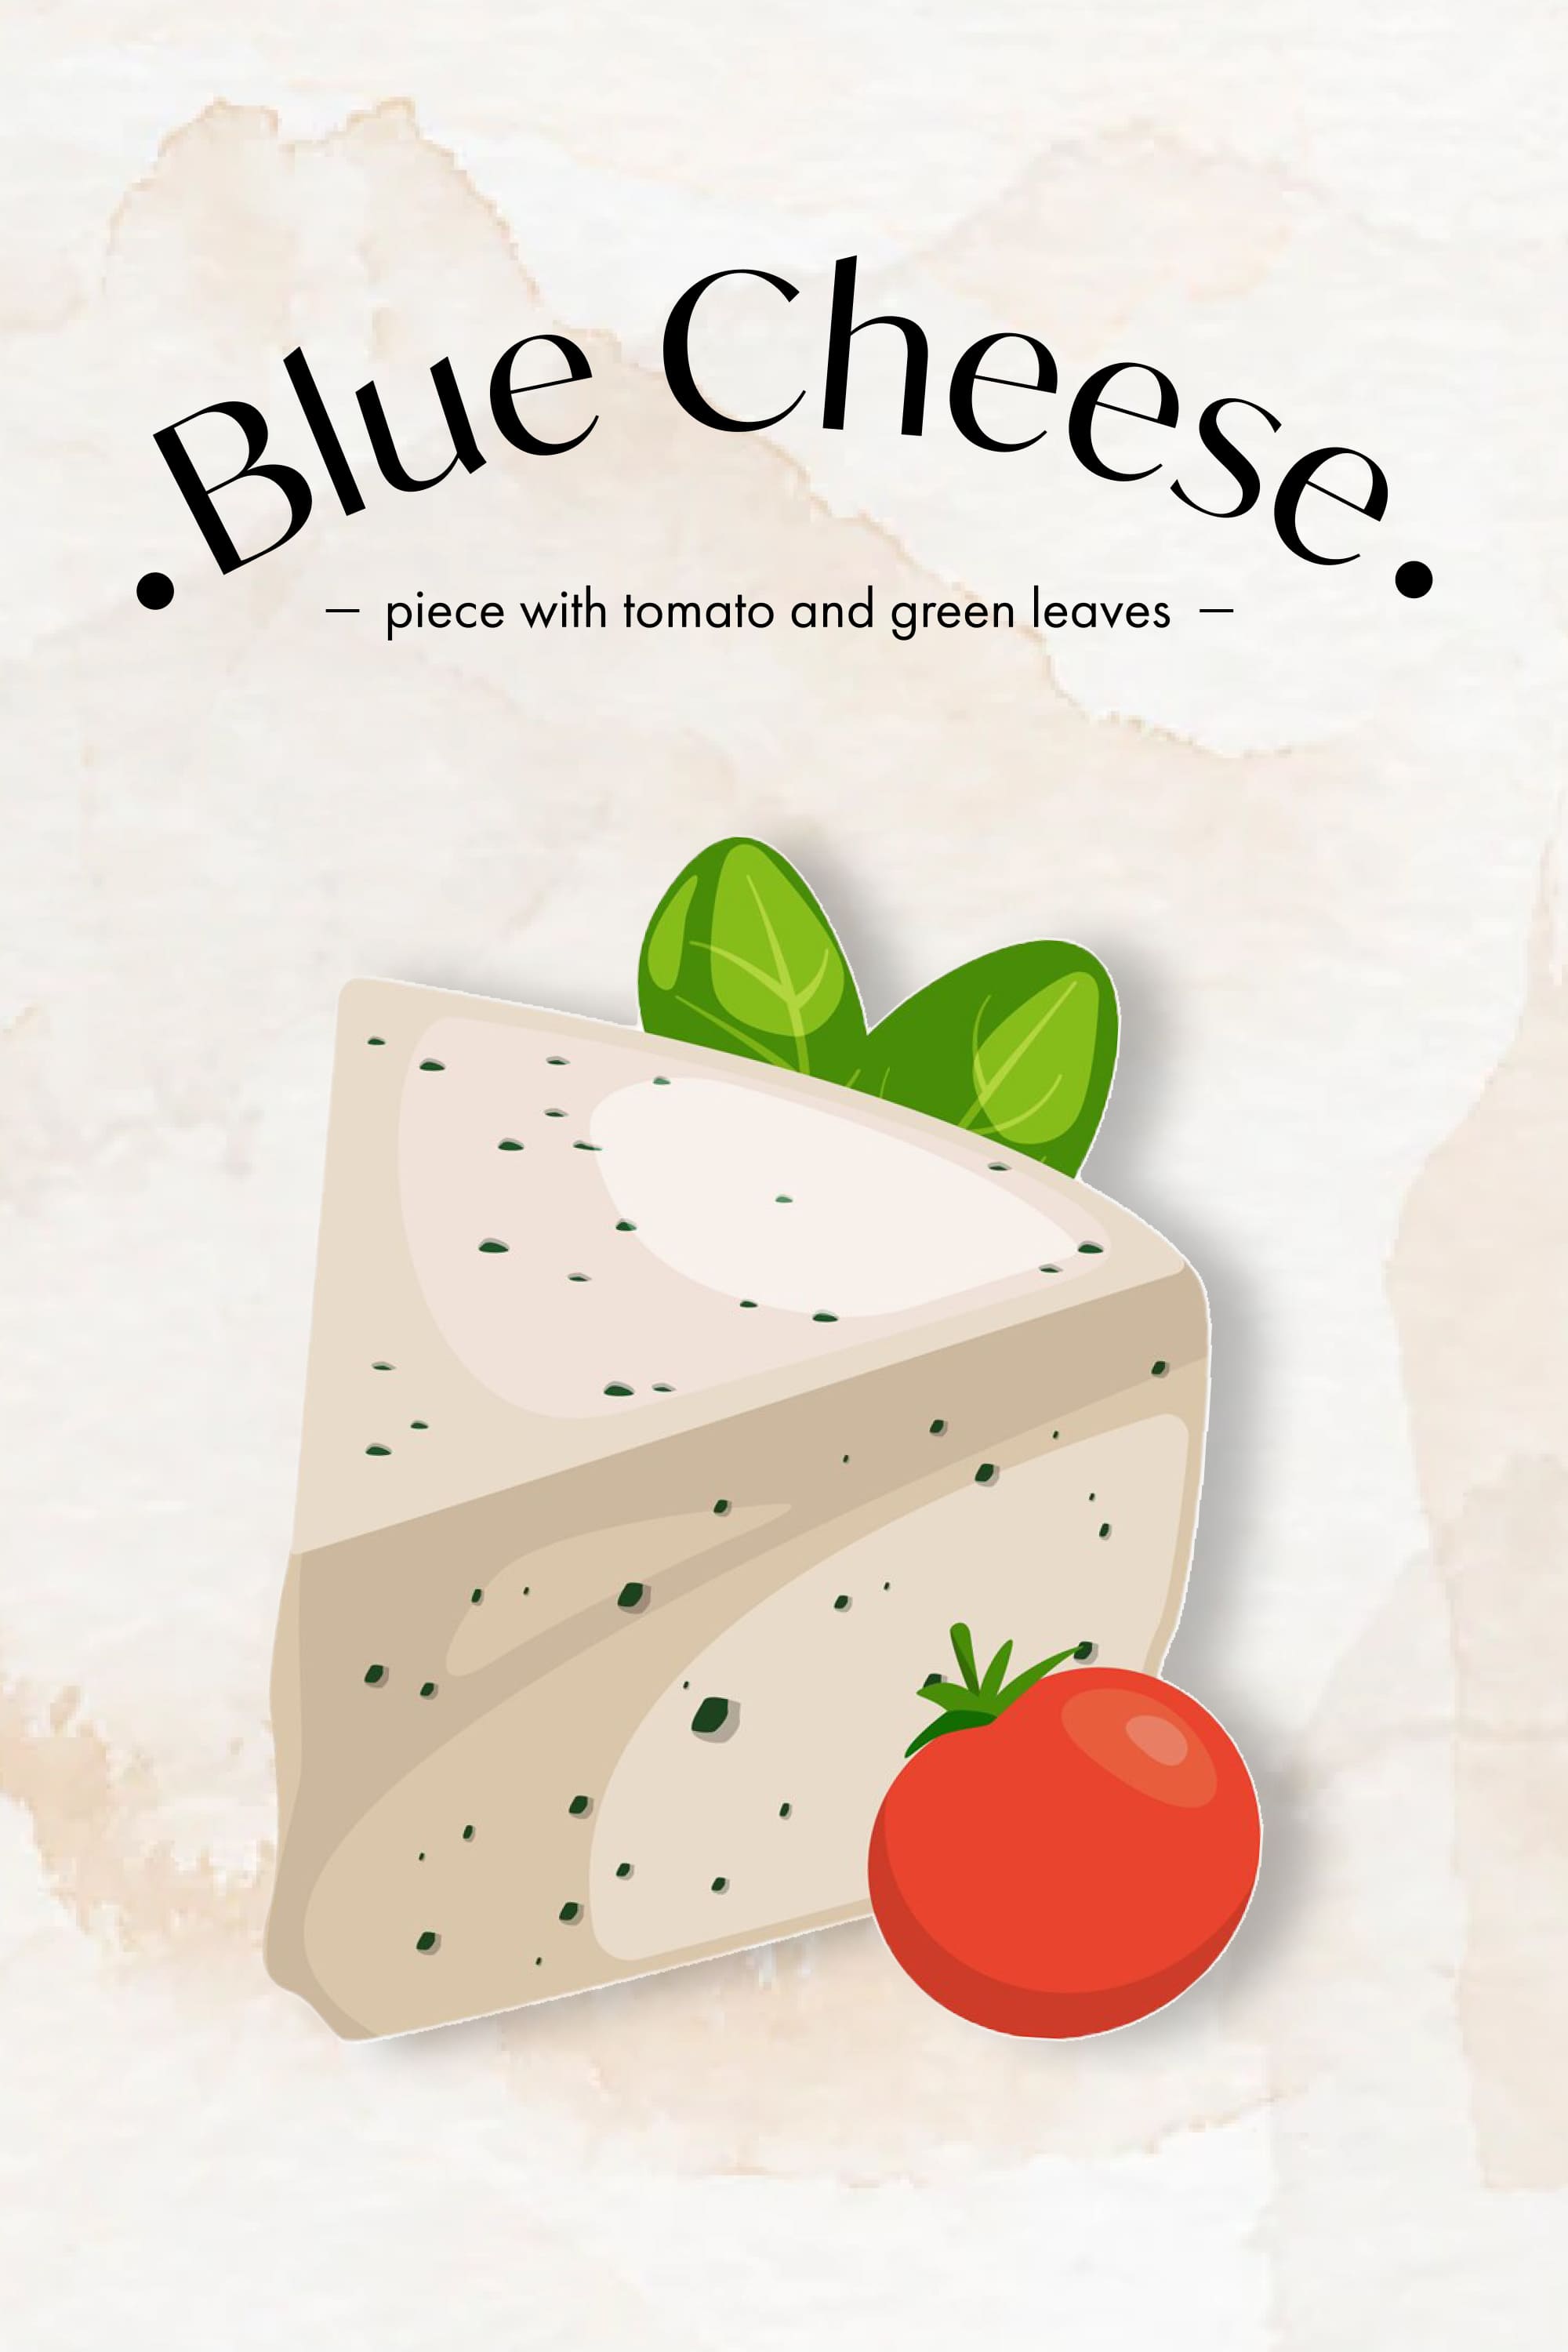 Cartoon image of blue cheese and tomato.